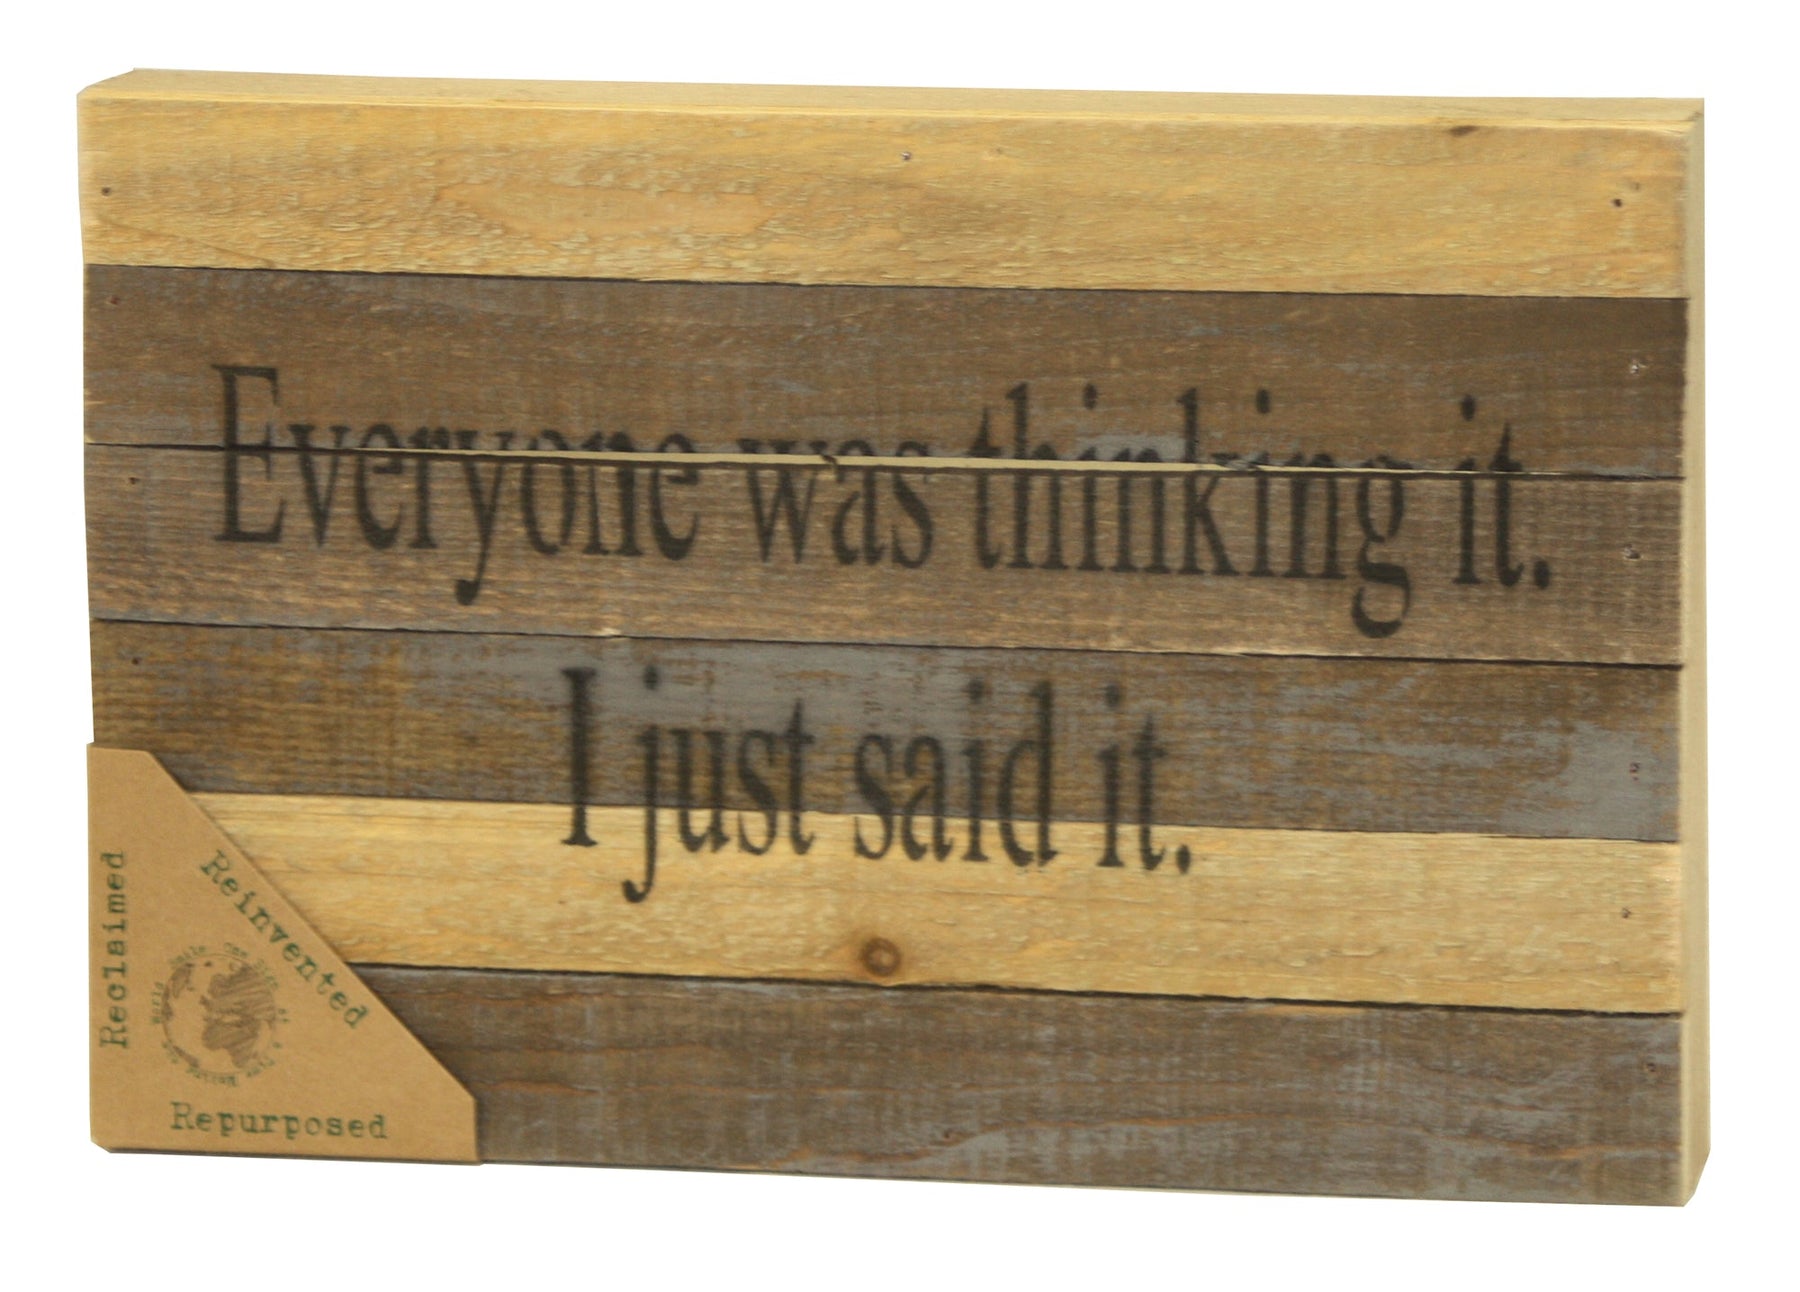 Everyone was thinking it. I just said it. / 12x8 Reclaimed Wood Wall Art